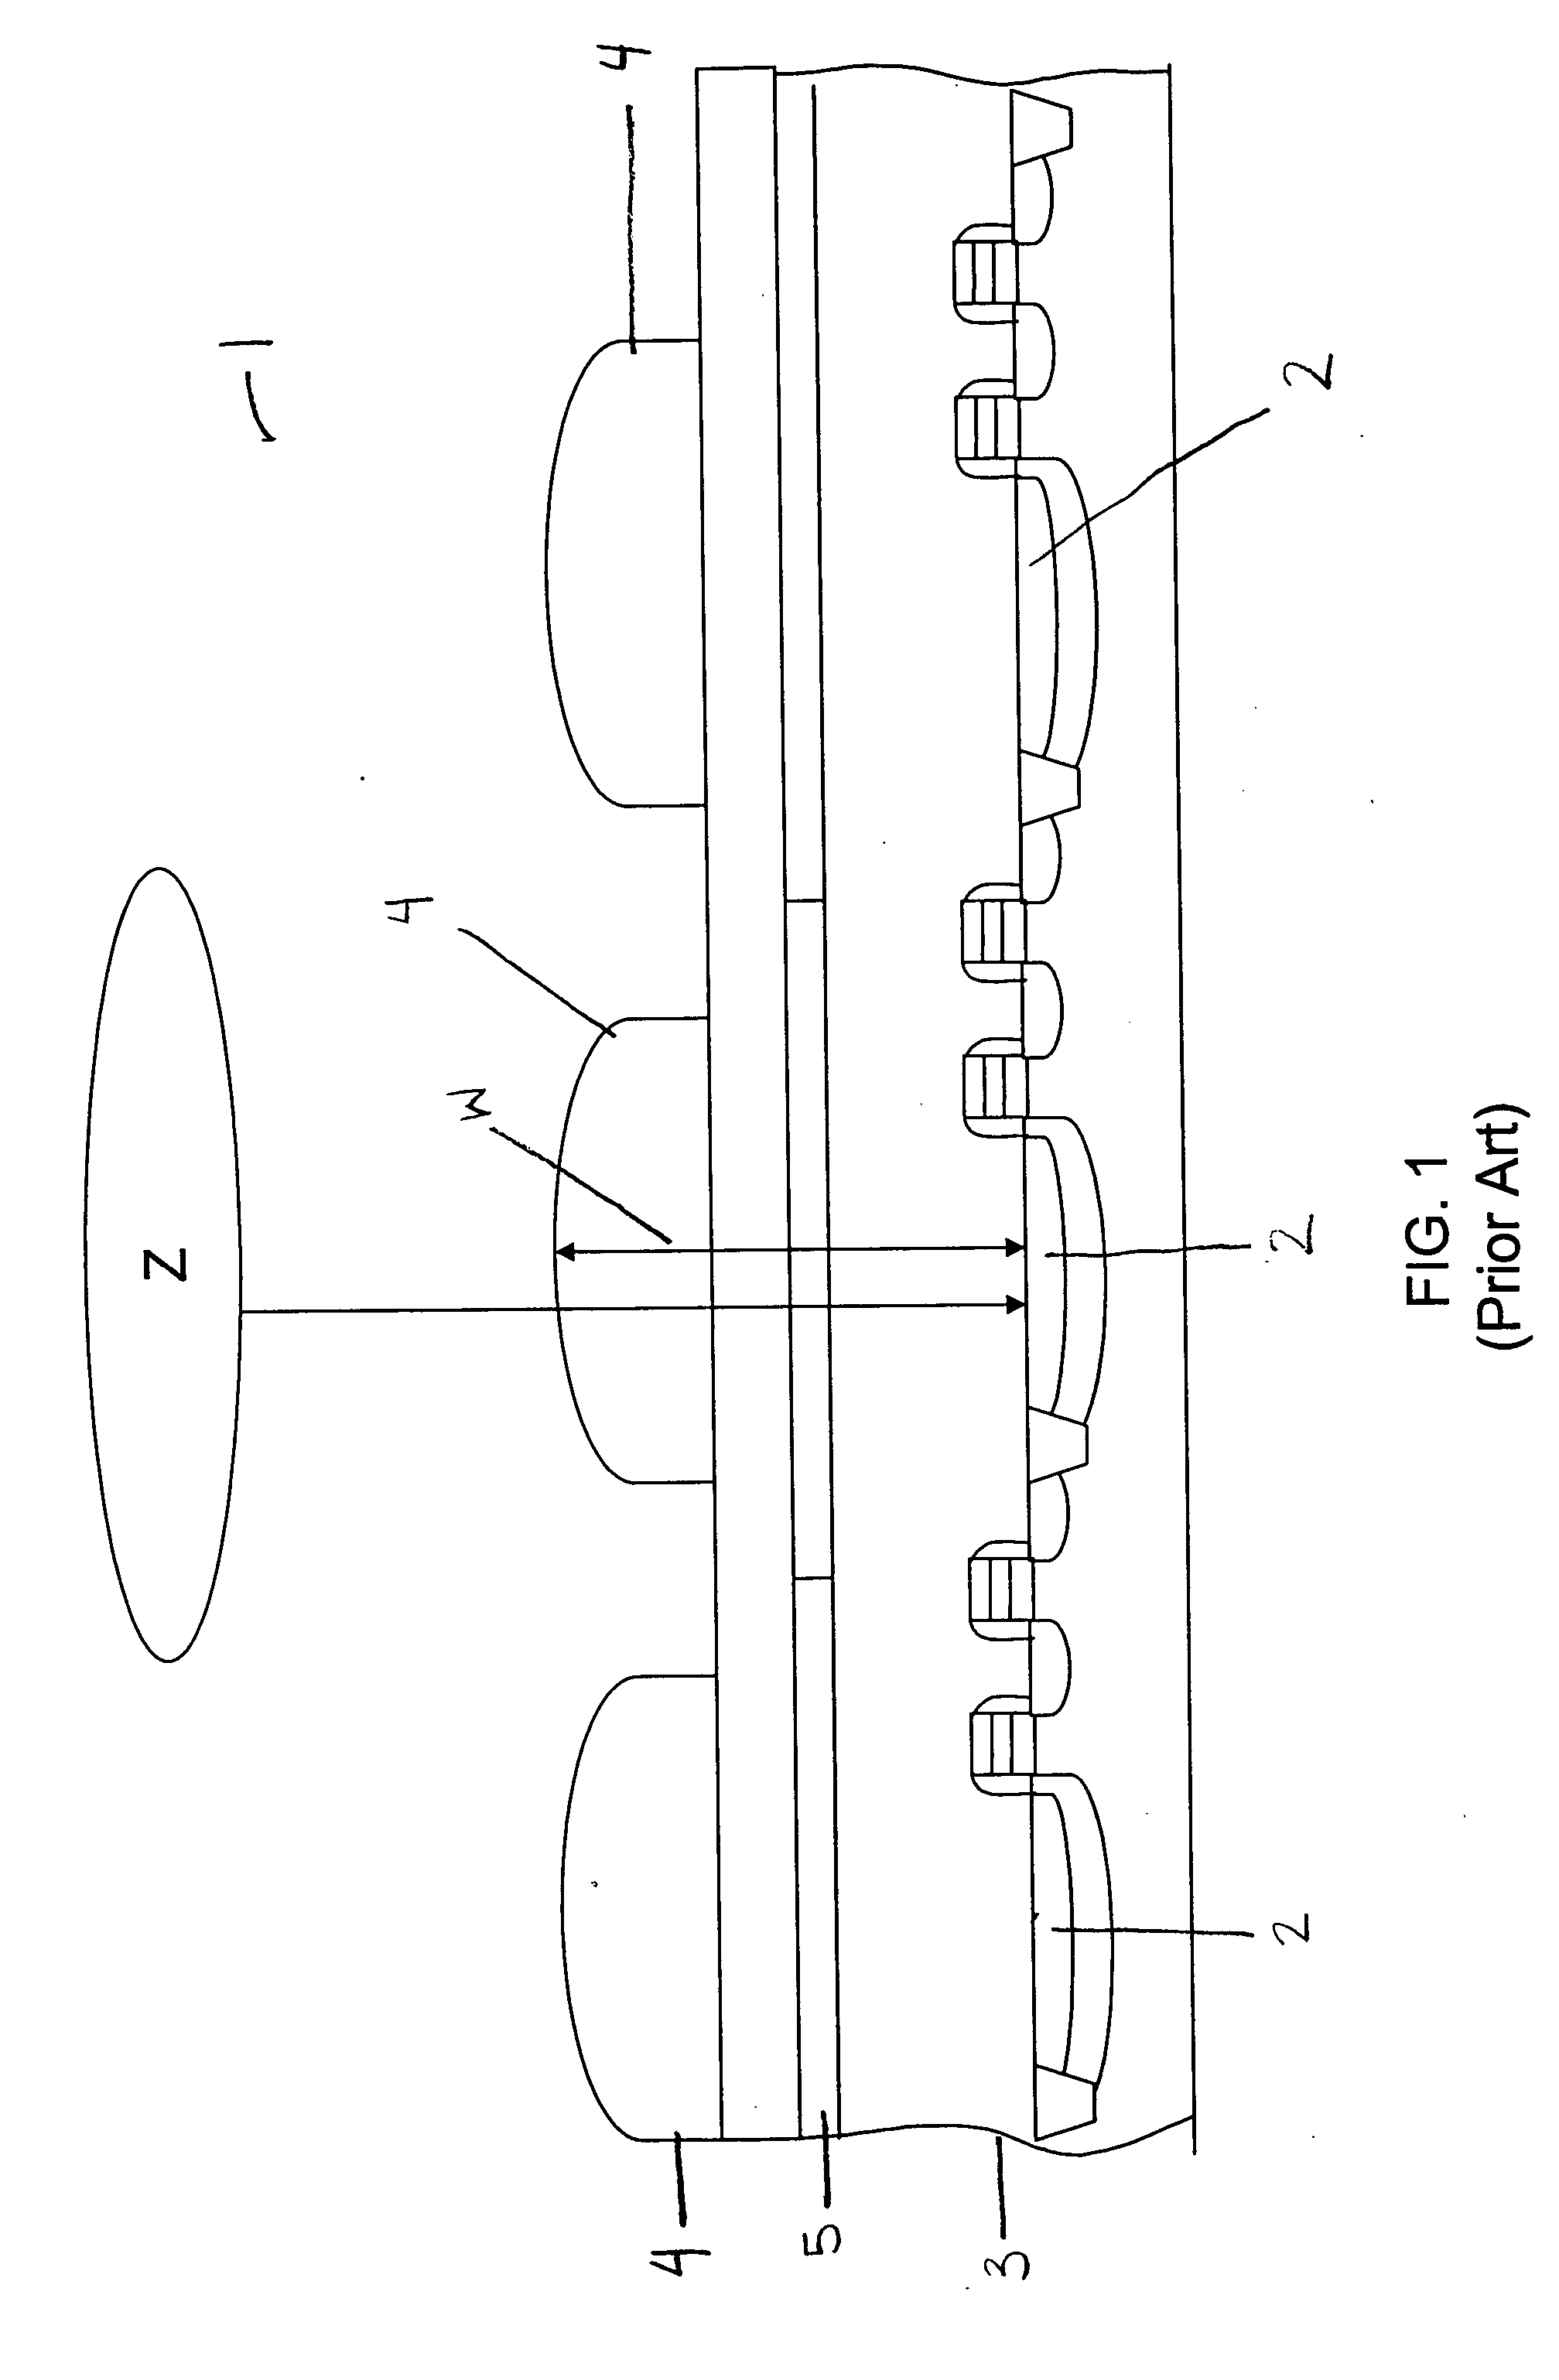 Micro-lens configuration for small lens focusing in digital imaging devices